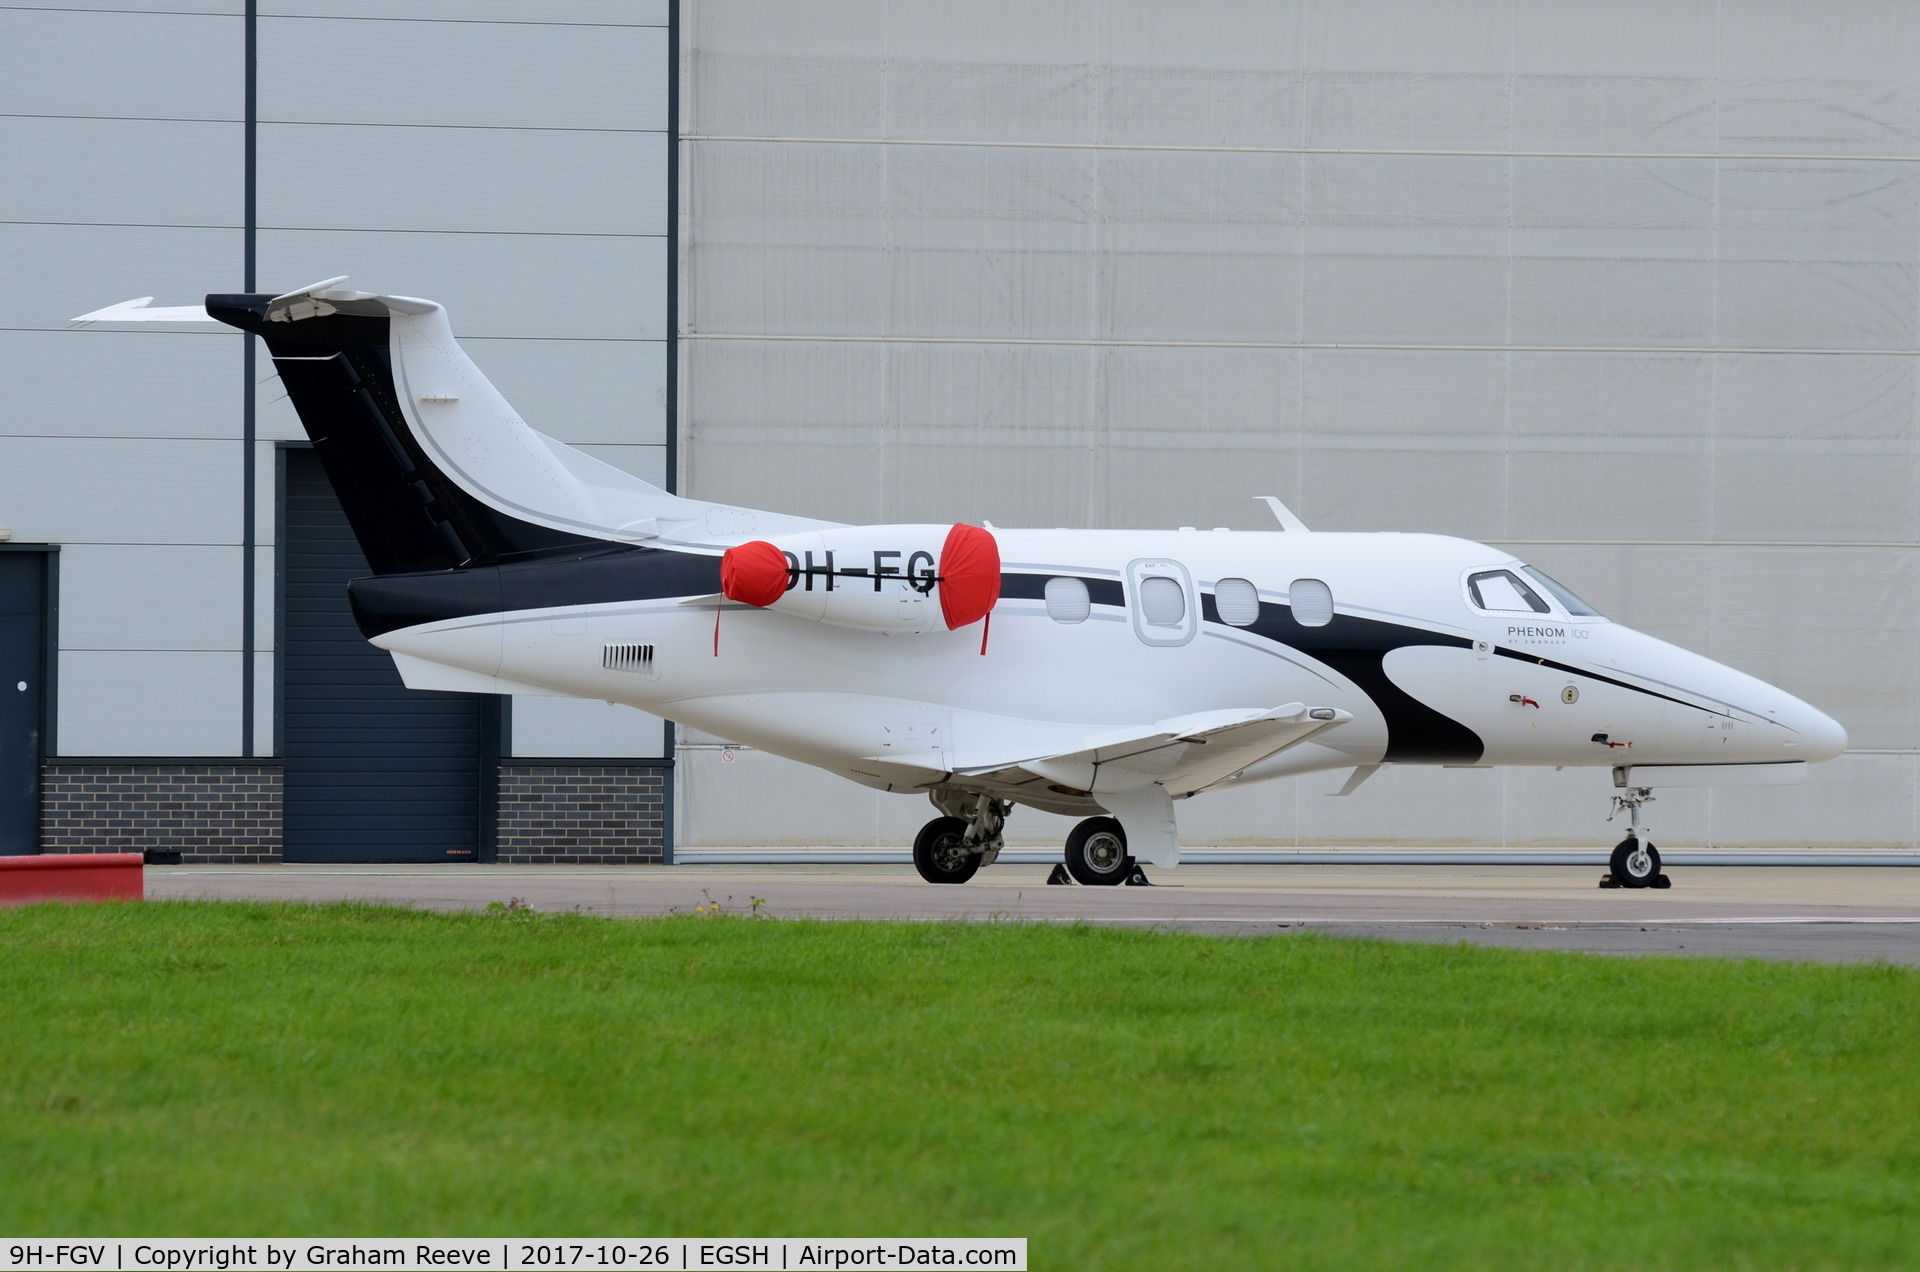 9H-FGV, 2010 Embraer EMB-500 Phenom 100 C/N 50000193, Parked at Norwich.